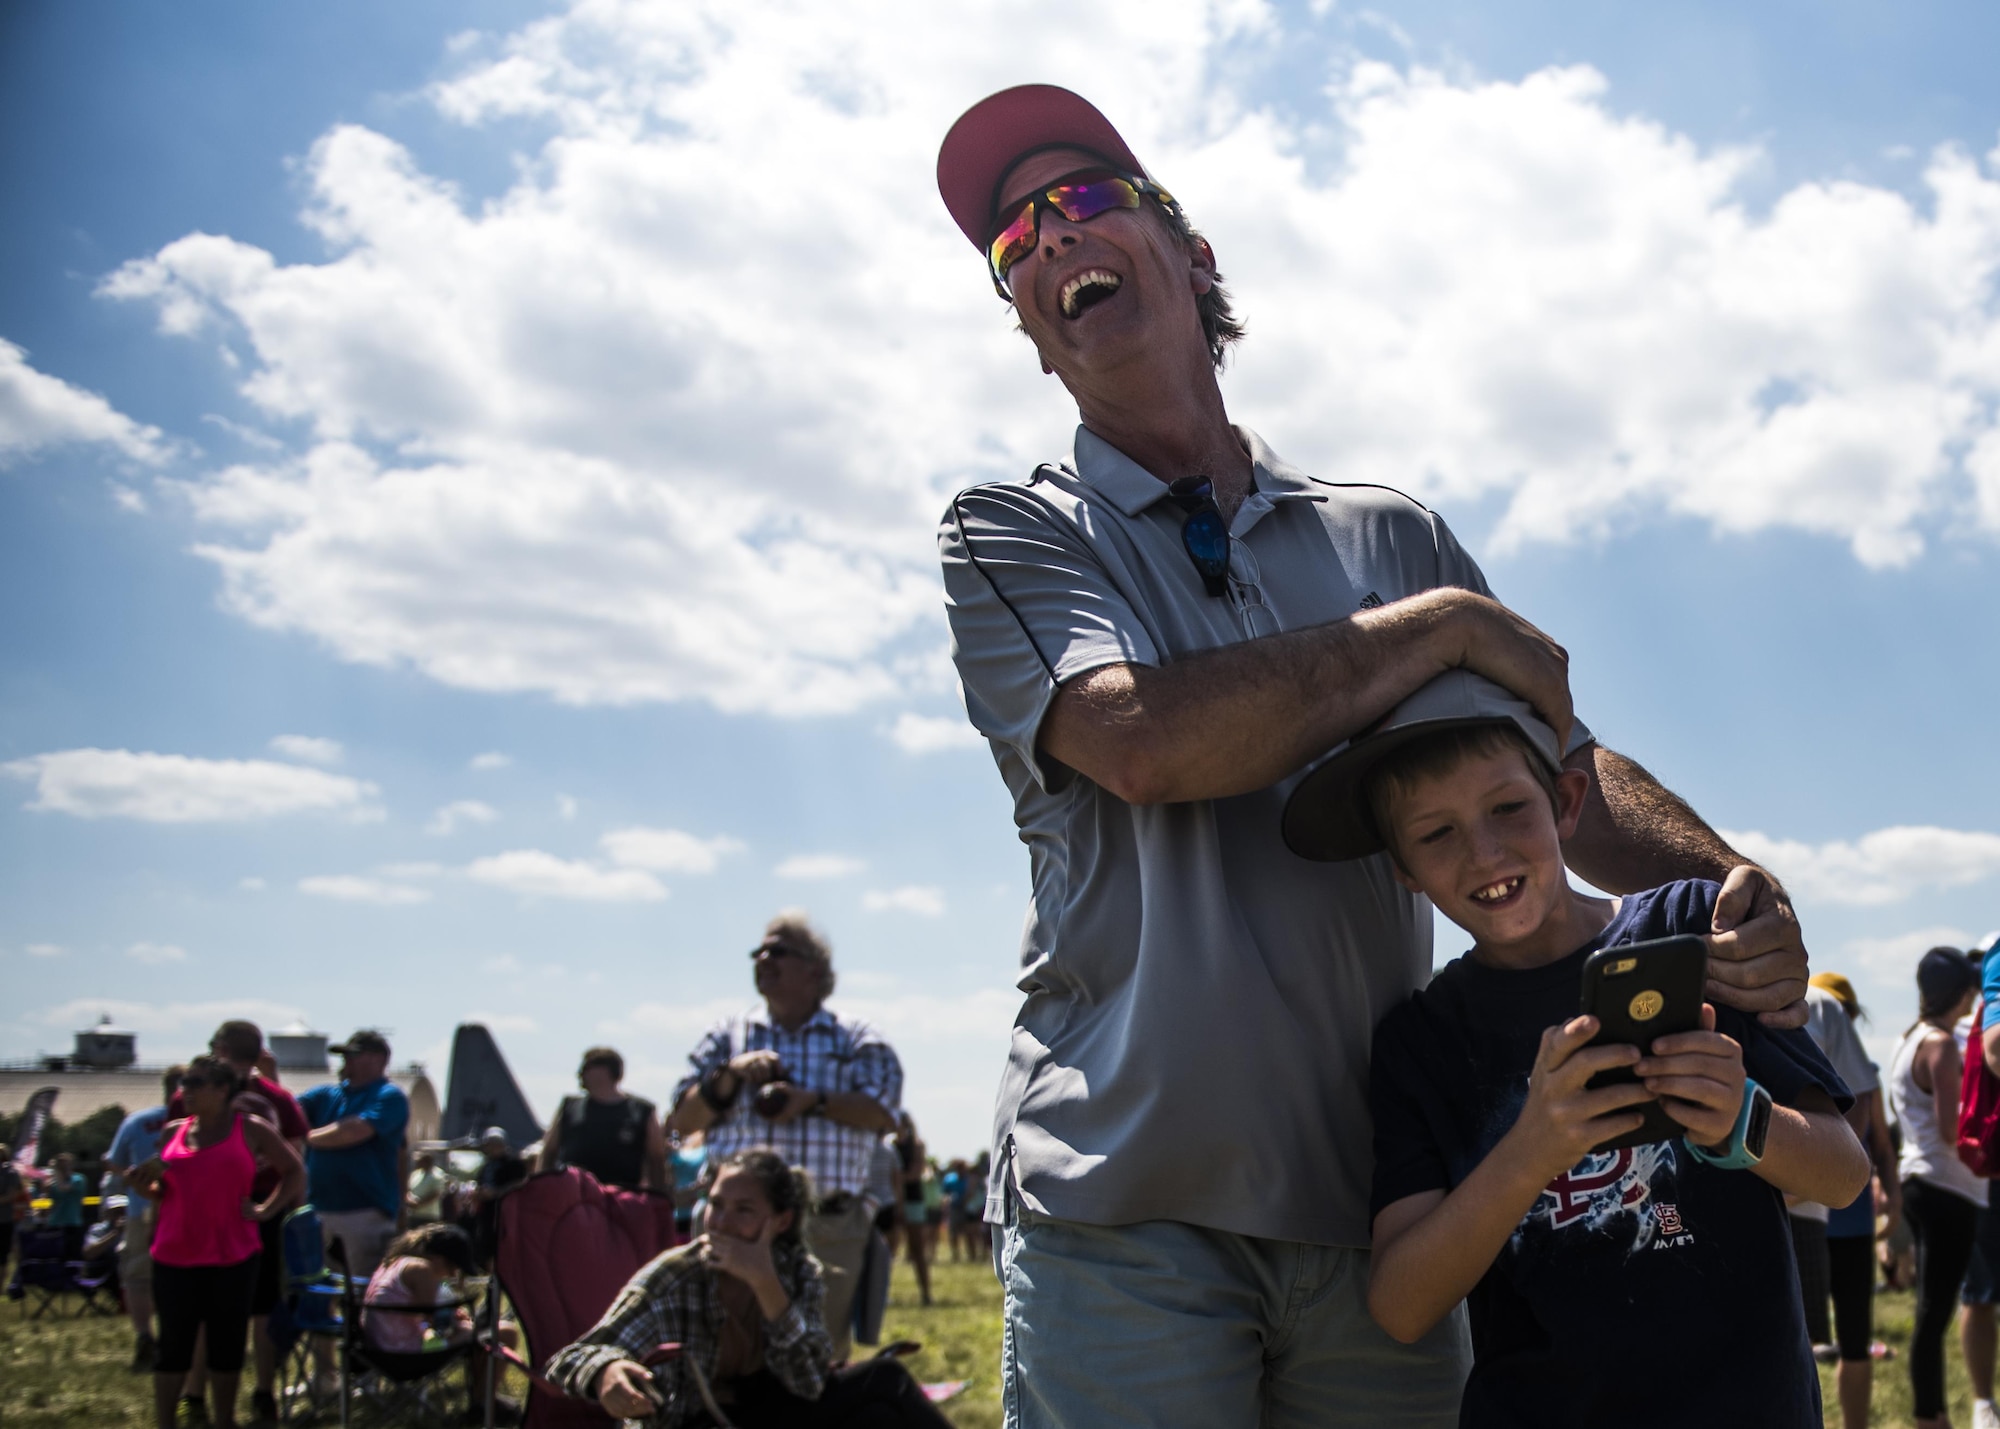 A father embraces his son in laughter after the Thunderbirds's roar startled him during the Scott Air Force Base Air Show, Scott Air Force Base, Ill., June 11, 2017. The base hosted the air show and open house to celebrate the 100th year of Scott AFB.  Over 50 aircraft, ranging from WWI’s Curtiss JN-4 Jenny to the currently utilized KC-135 Stratotanker, came to Scott, the fourth oldest Air Force base. Demonstrations included the Black Daggers, “Tora, Tora, Tora,” and the USAF Thunderbirds. Opened in 1917 and previously named Scott Field, the base has seen its mission evolve and expand to encompass a multitude of priorities, including aeromedical evacuation and communications.  Today, Scott is home to 31 mission partners and provides around-the-clock logistics support and rapid global mobility, carried out primarily by U.S. Transportation Command and Air Mobility Command.